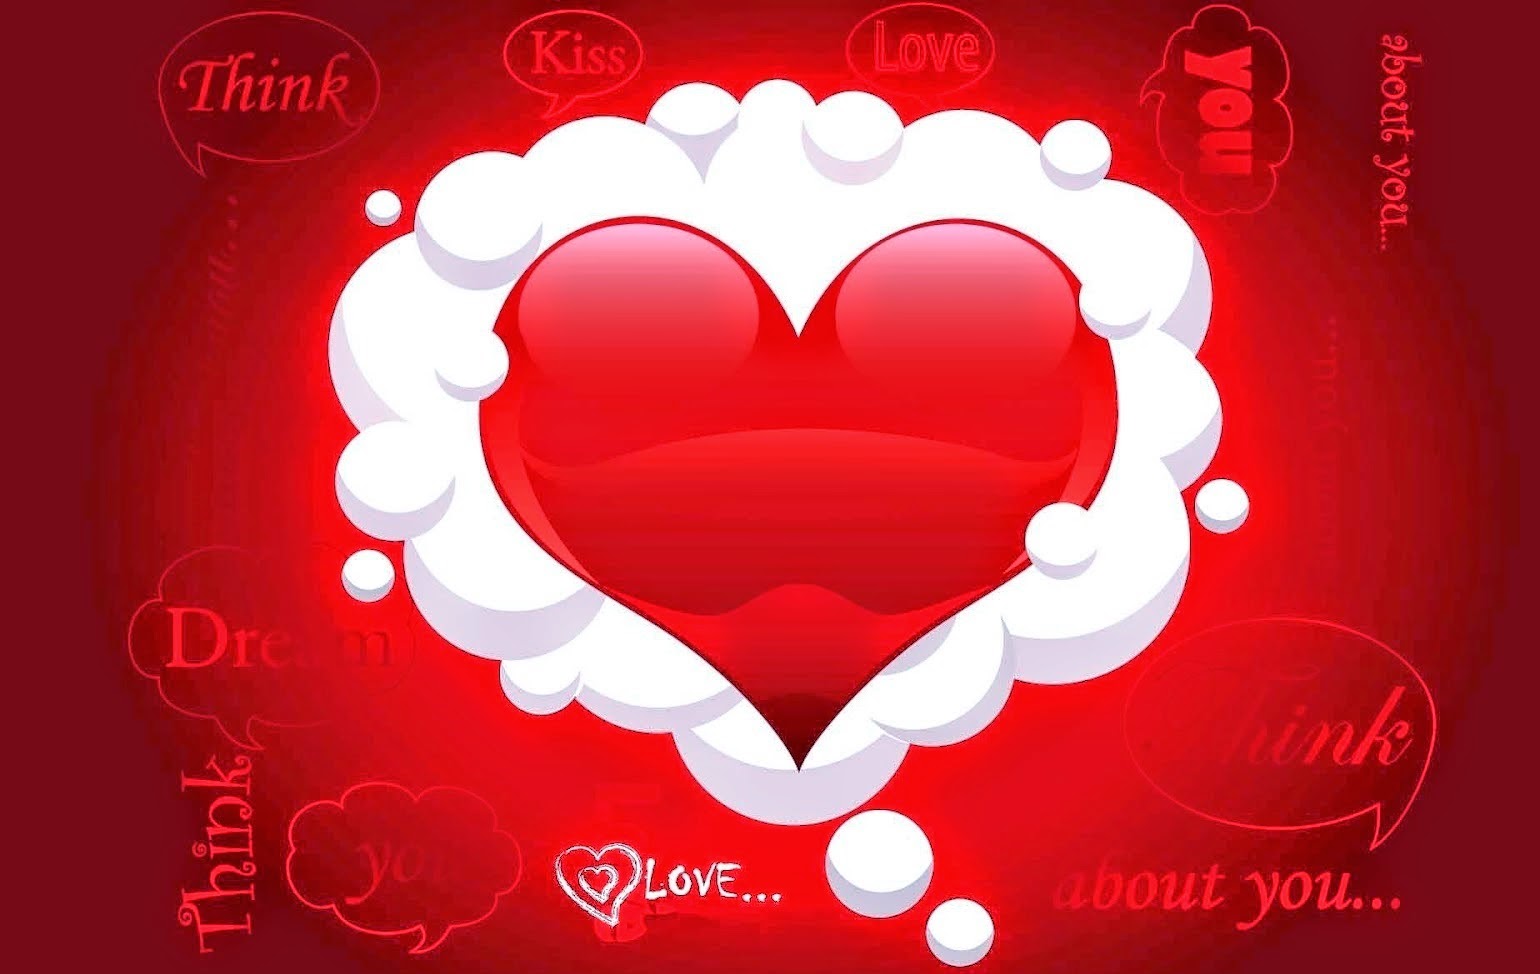 Happy Valentine Day 2015 HD Greetings, Images, Pictures, Photos